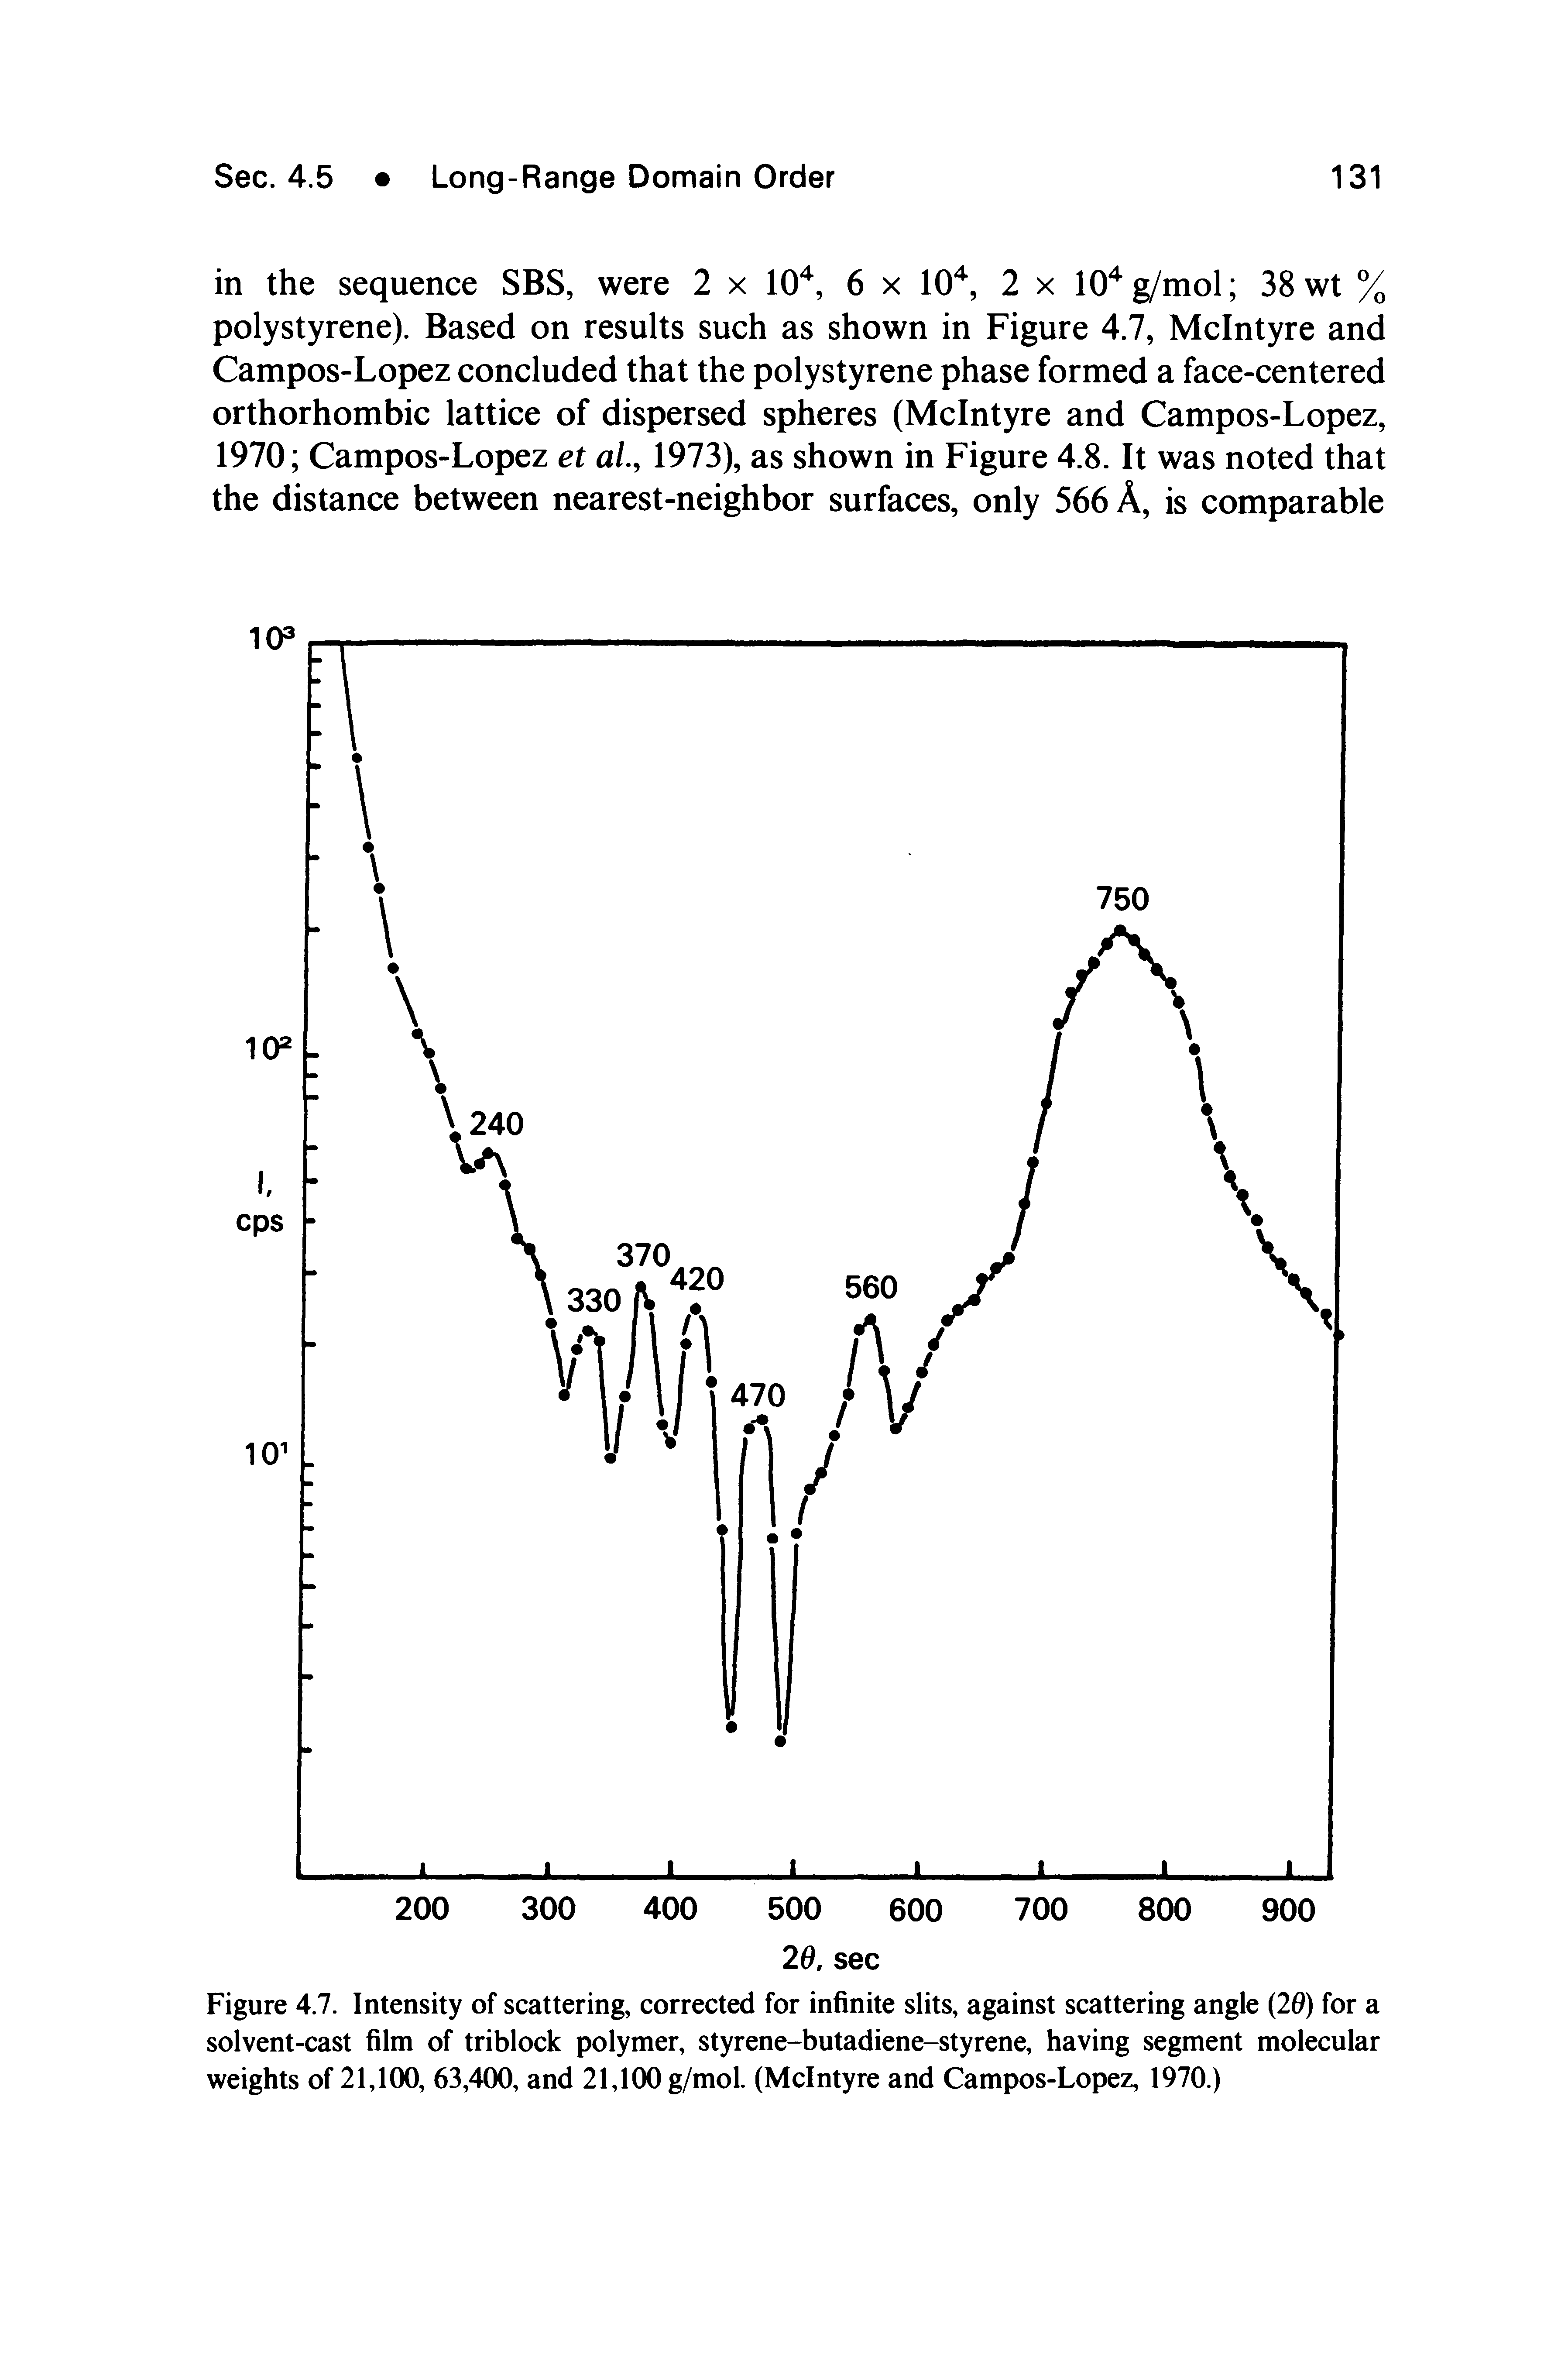 Figure 4.7. Intensity of scattering, corrected for infinite slits, against scattering angle (26) for a solvent-cast film of triblock polymer, styrene-butadiene-styrene, having segment molecular weights of 21,100, 63,400, and 21,100 g/mol. (McIntyre and Campos-Lopez, 1970.)...